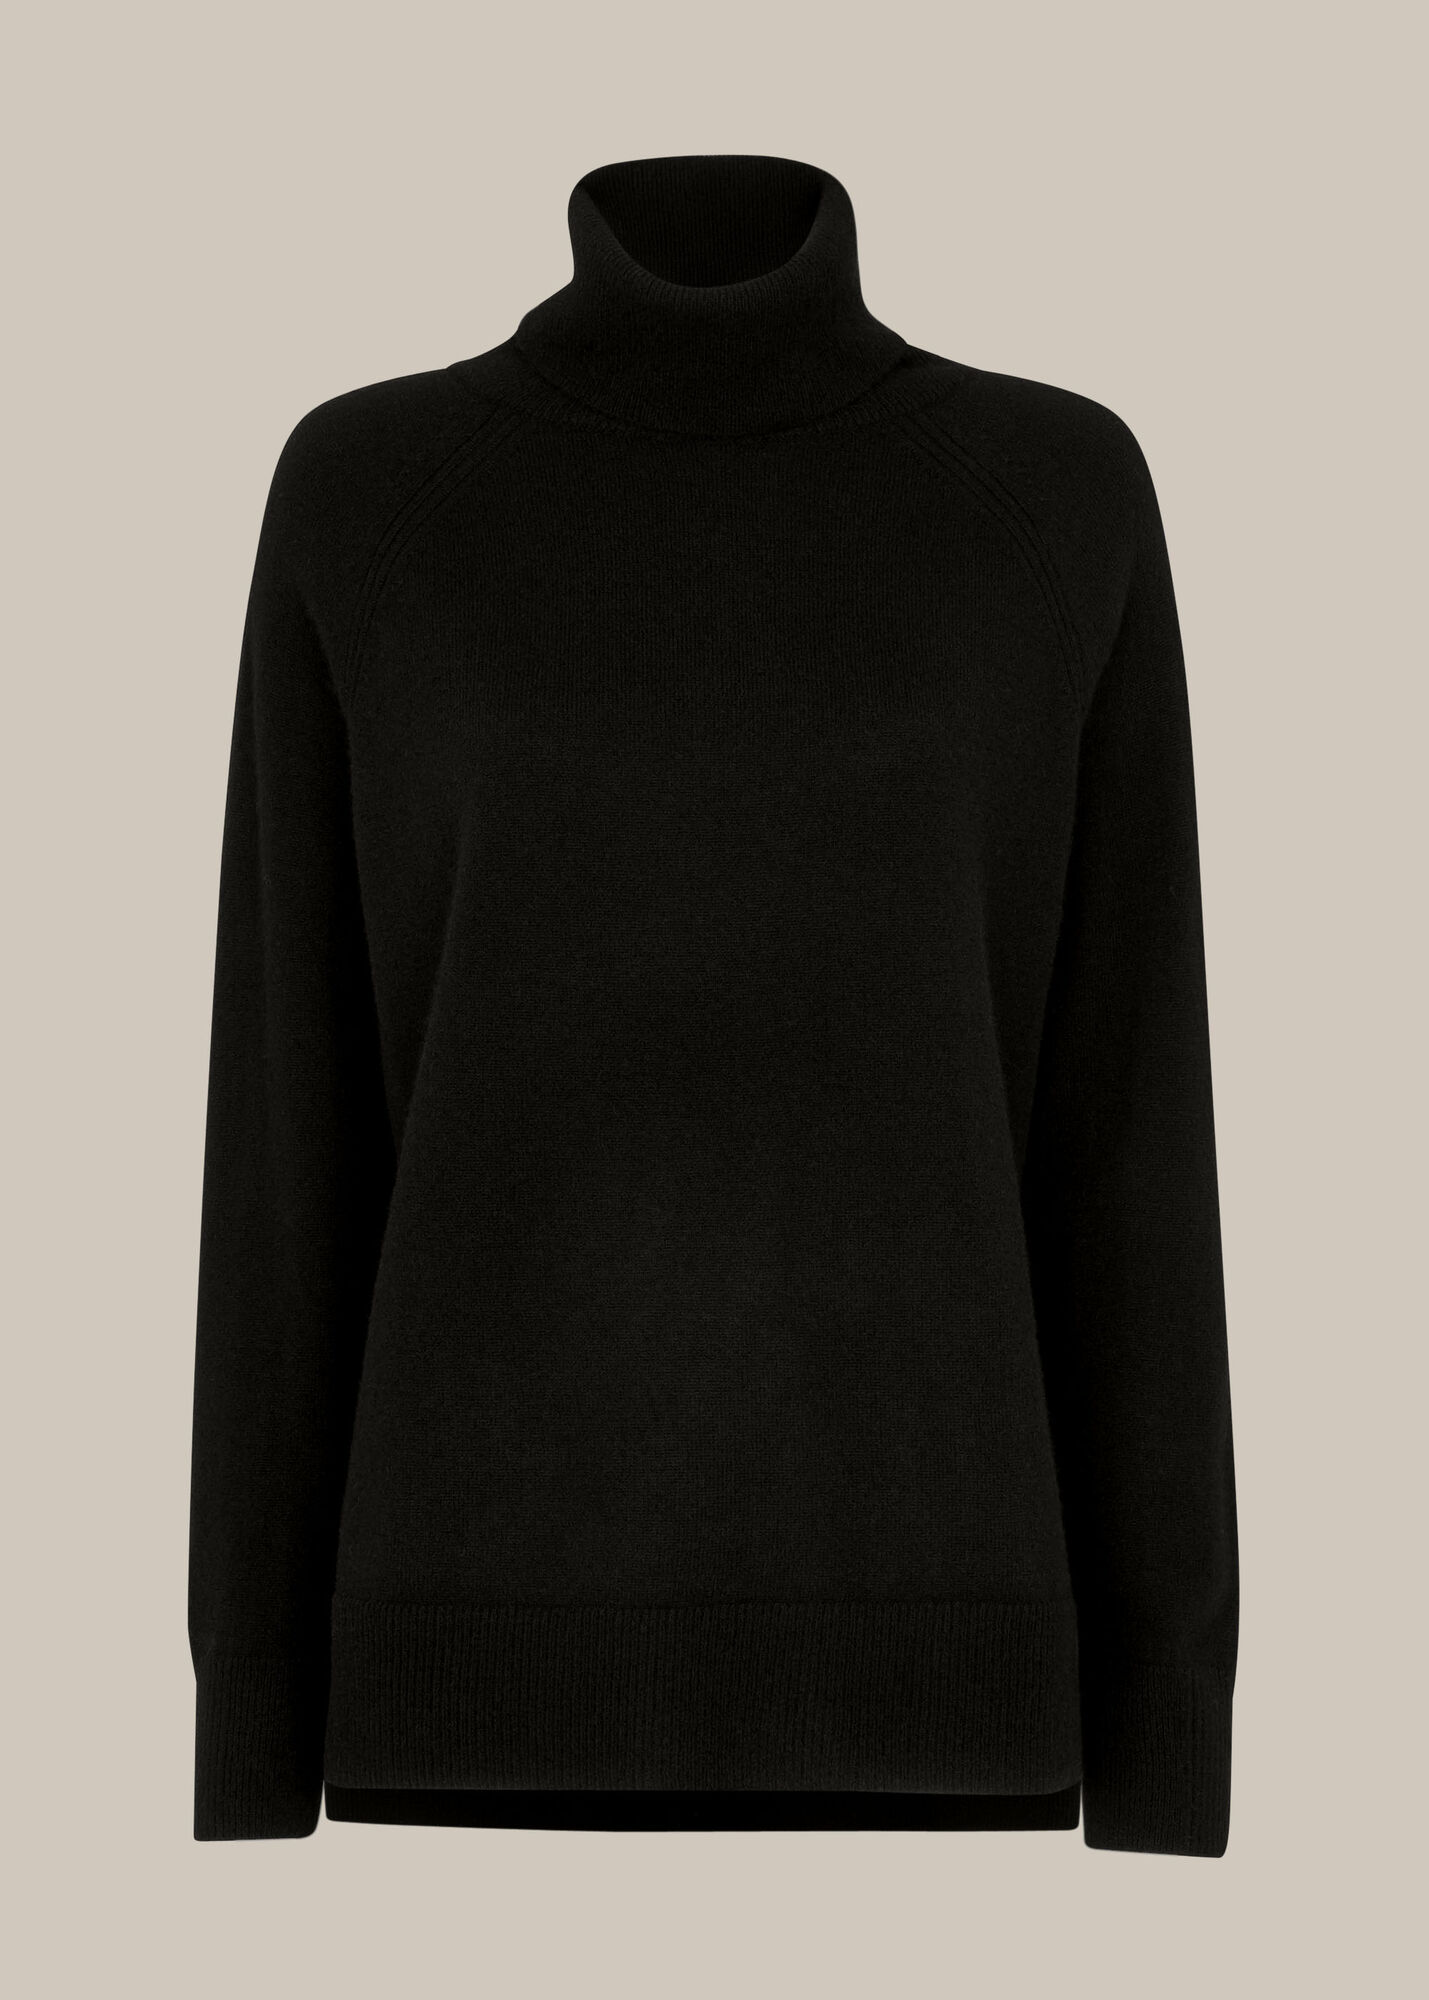 Black Cashmere Roll Neck Knit | WHISTLES